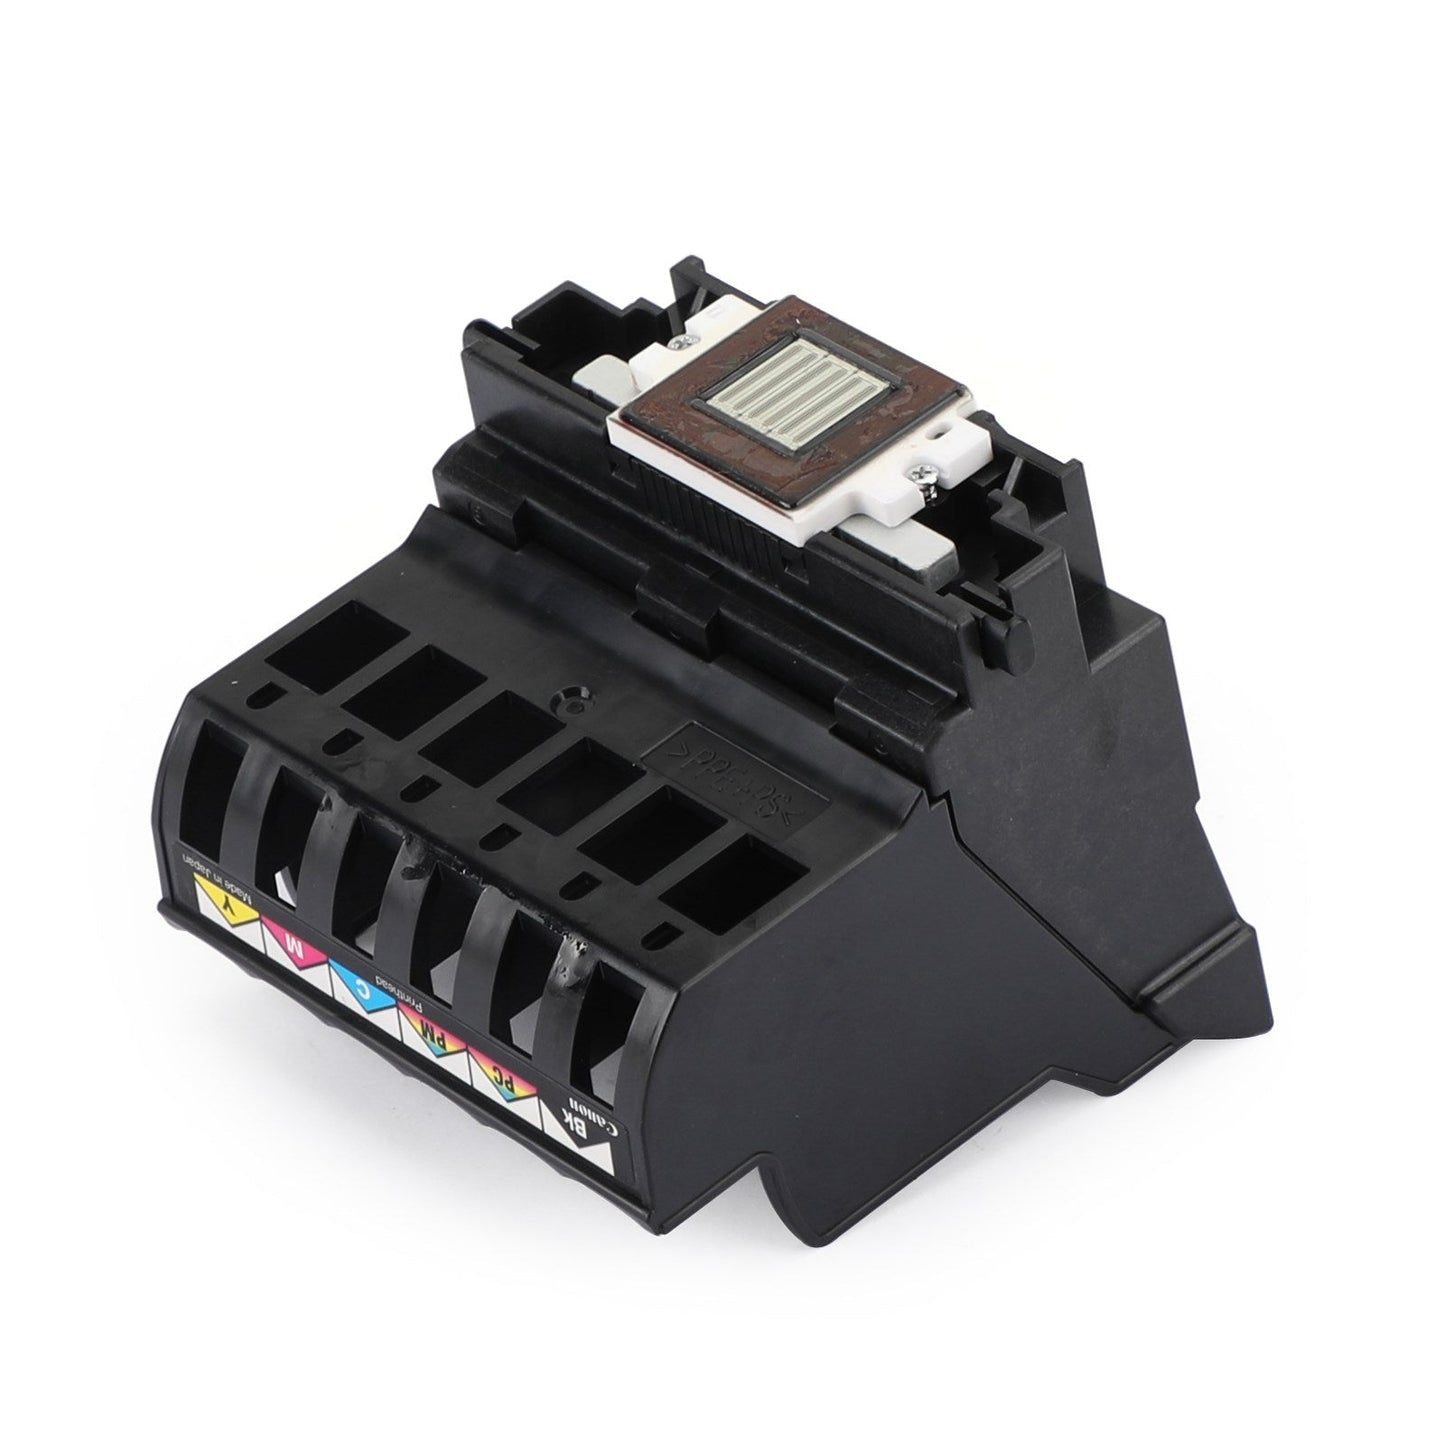 Replacement Printer Print Head QY6-0039 Fit for 9100i S9000 S900 i9100 F9000